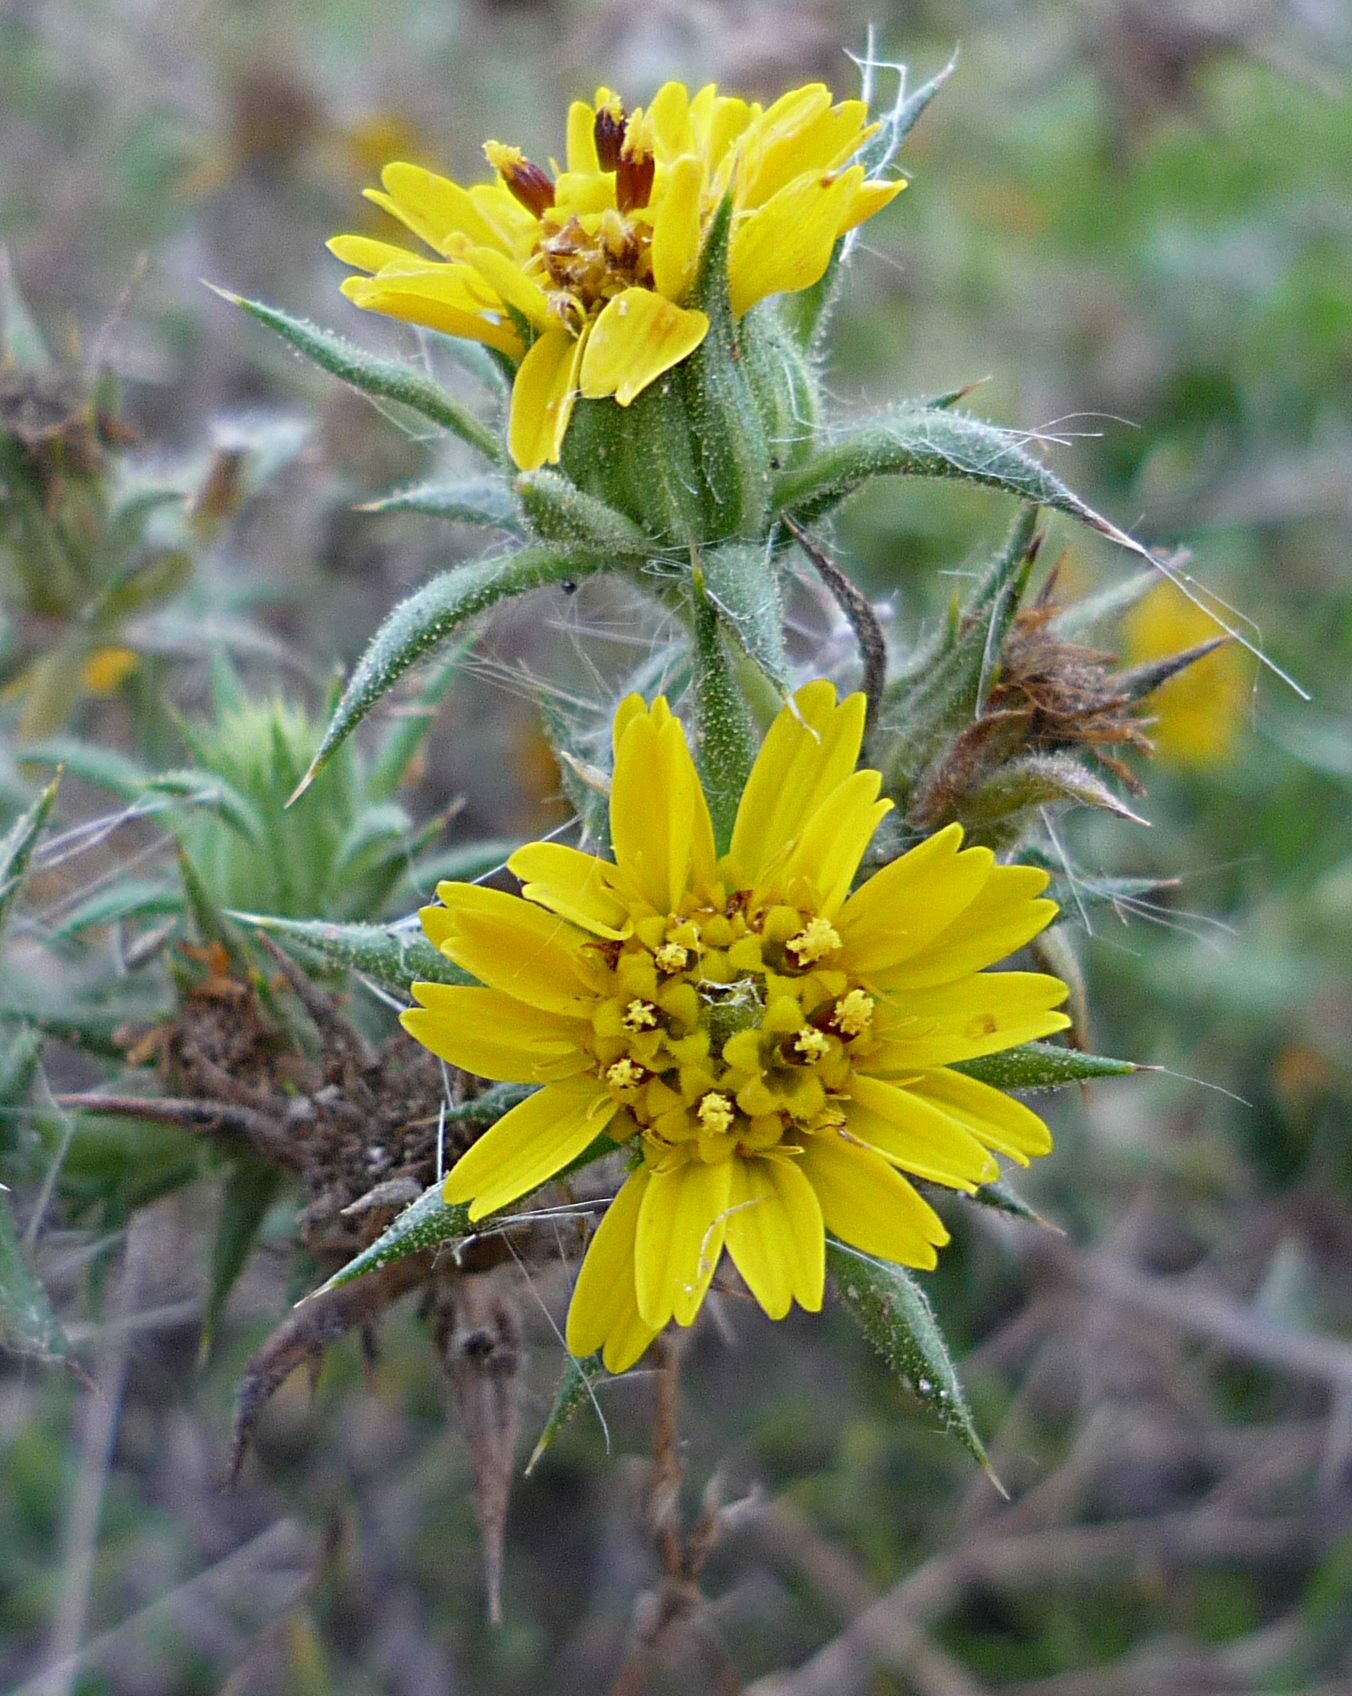 High Resolution Centromadia parryi Flower